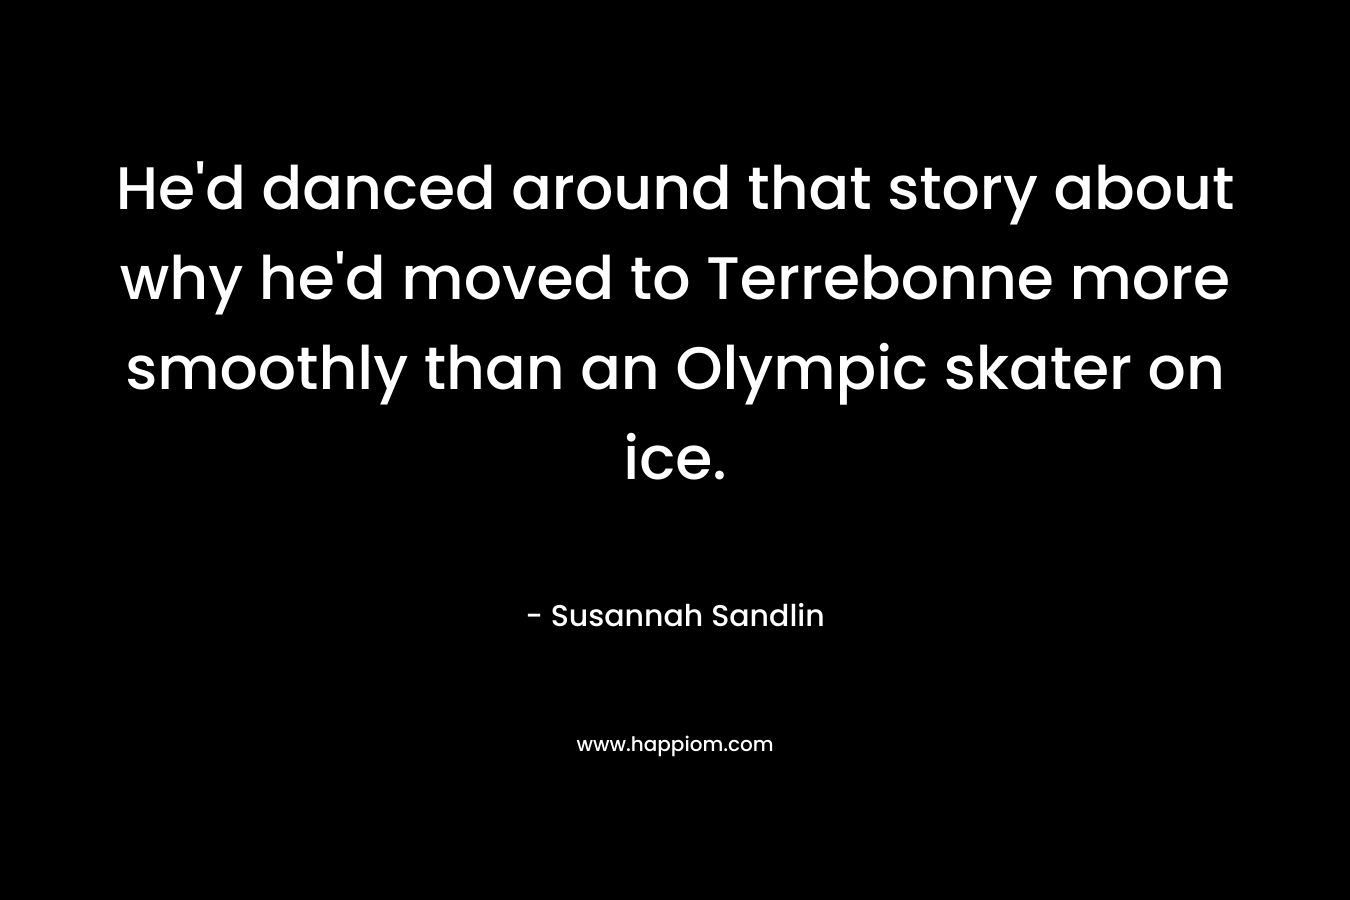 He'd danced around that story about why he'd moved to Terrebonne more smoothly than an Olympic skater on ice.